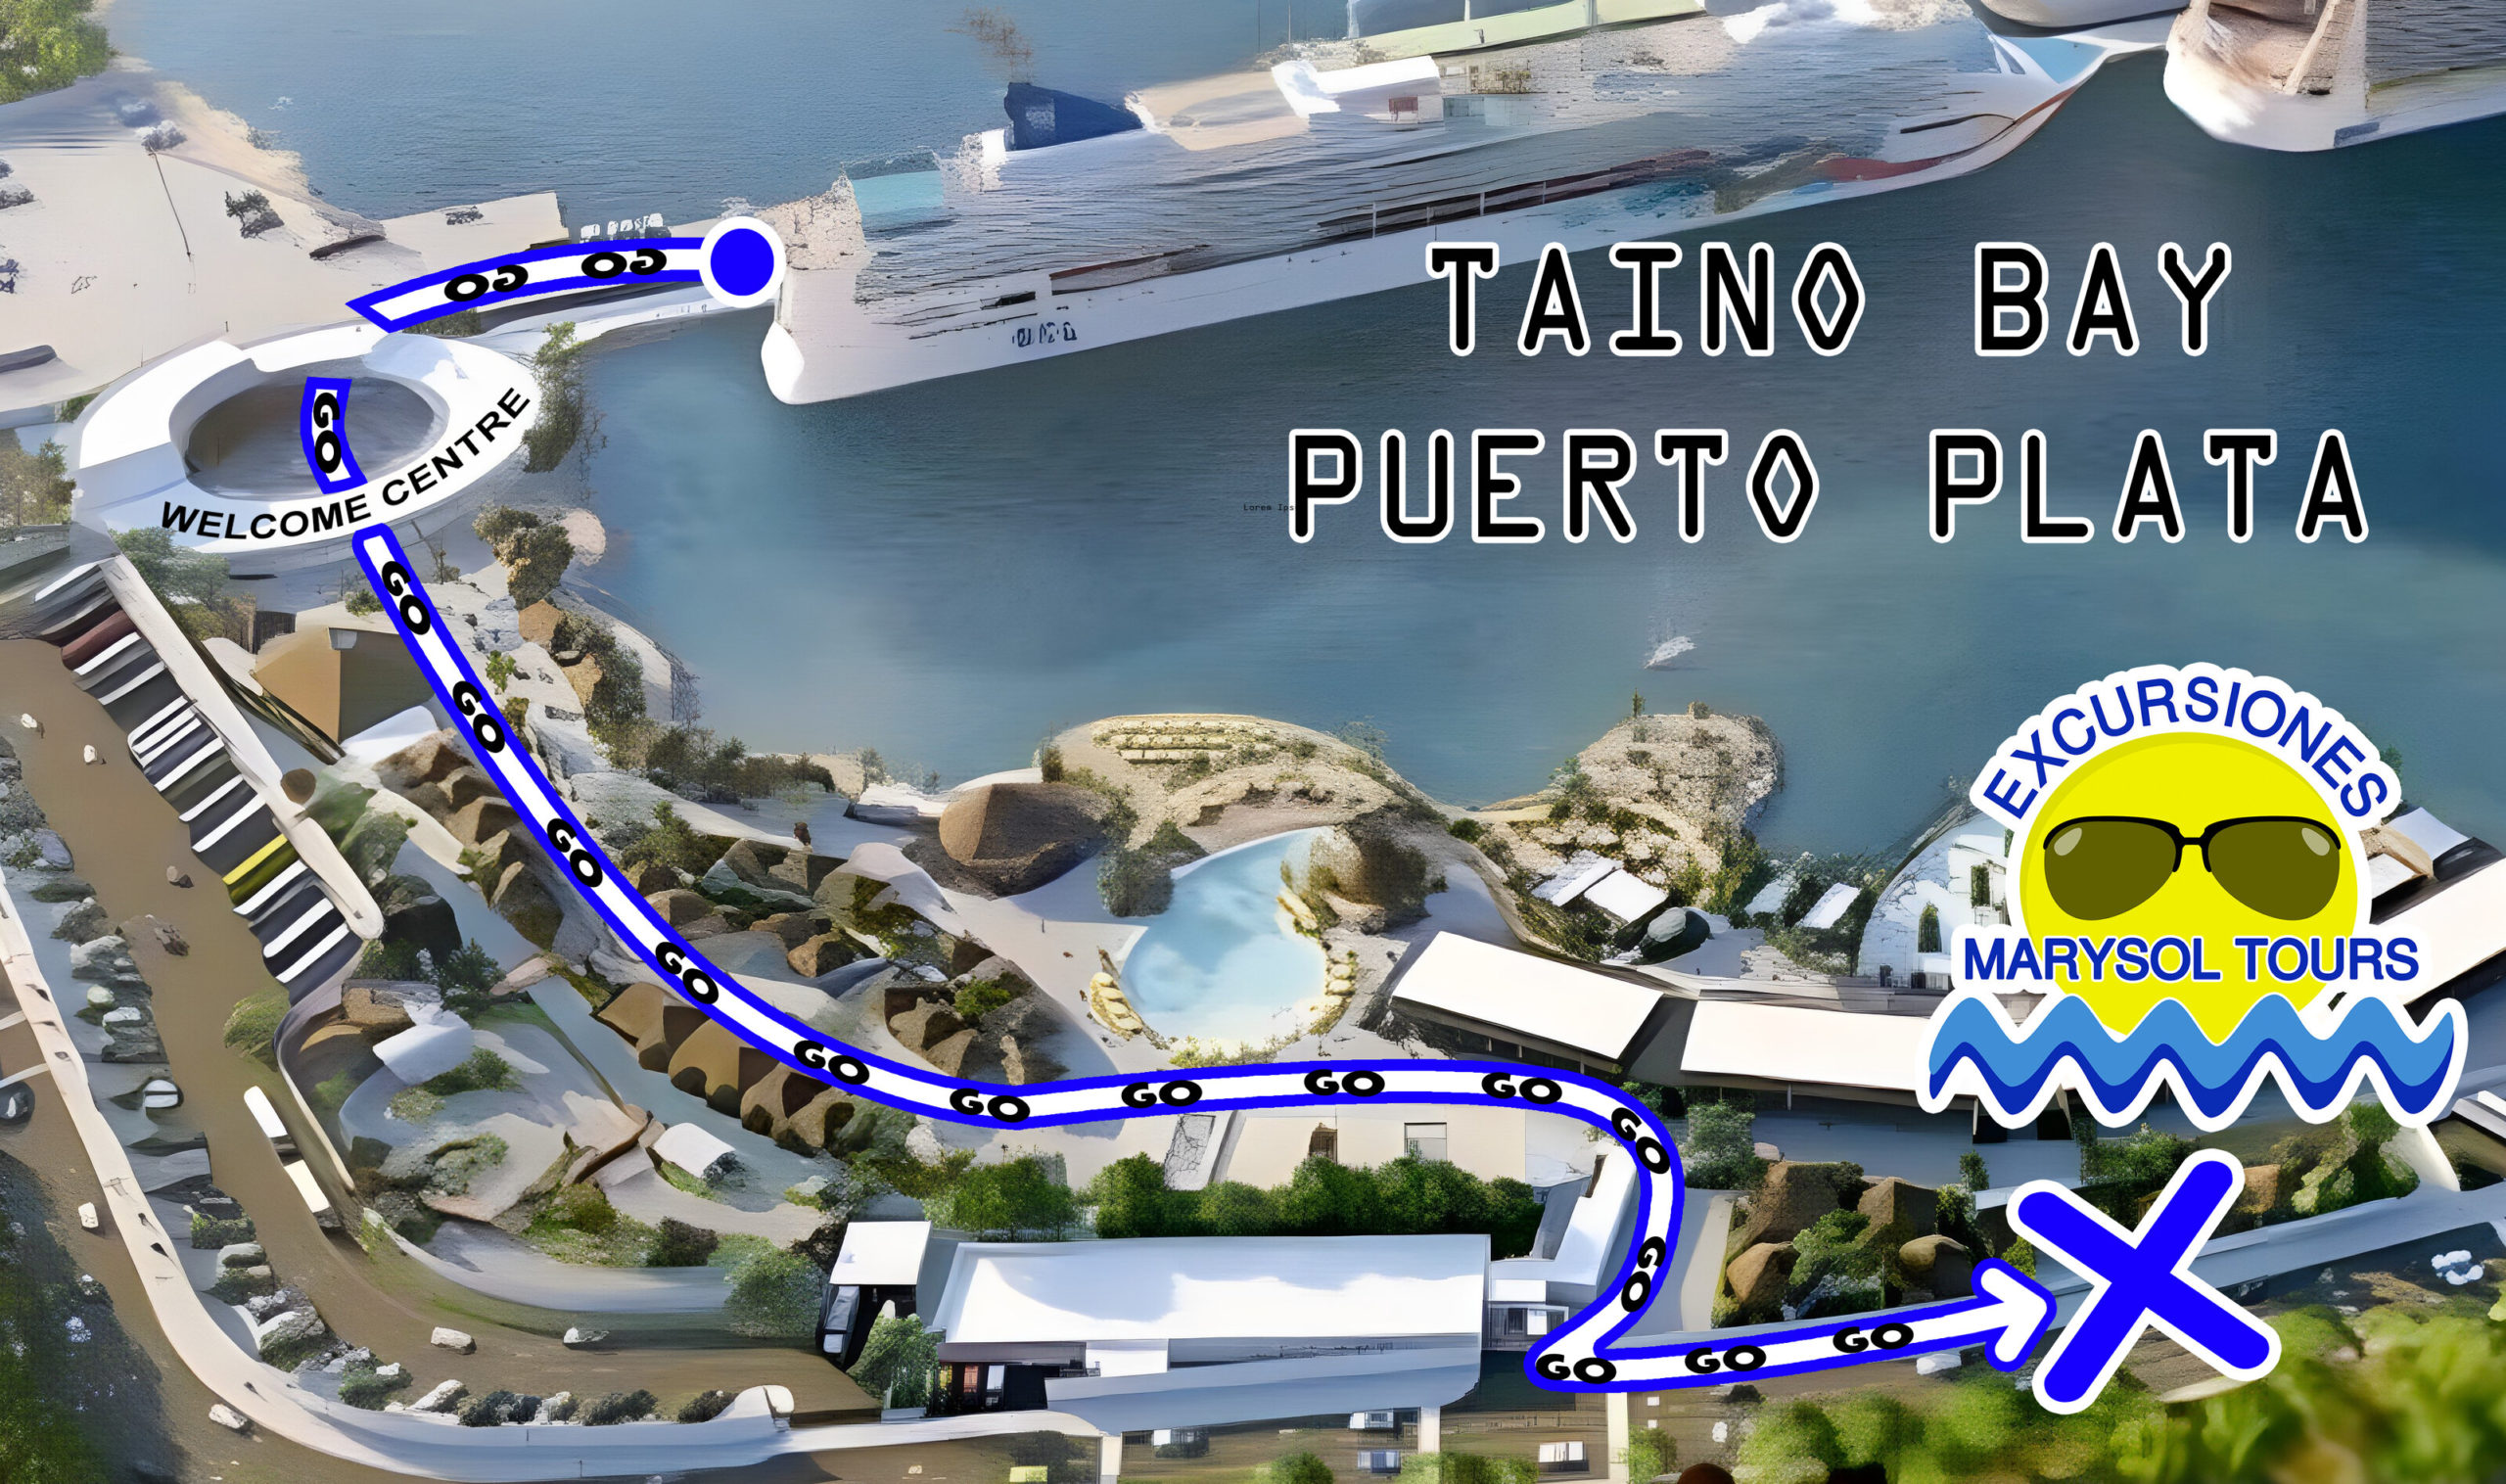 Taino Bay Map to locate Marysol Tours